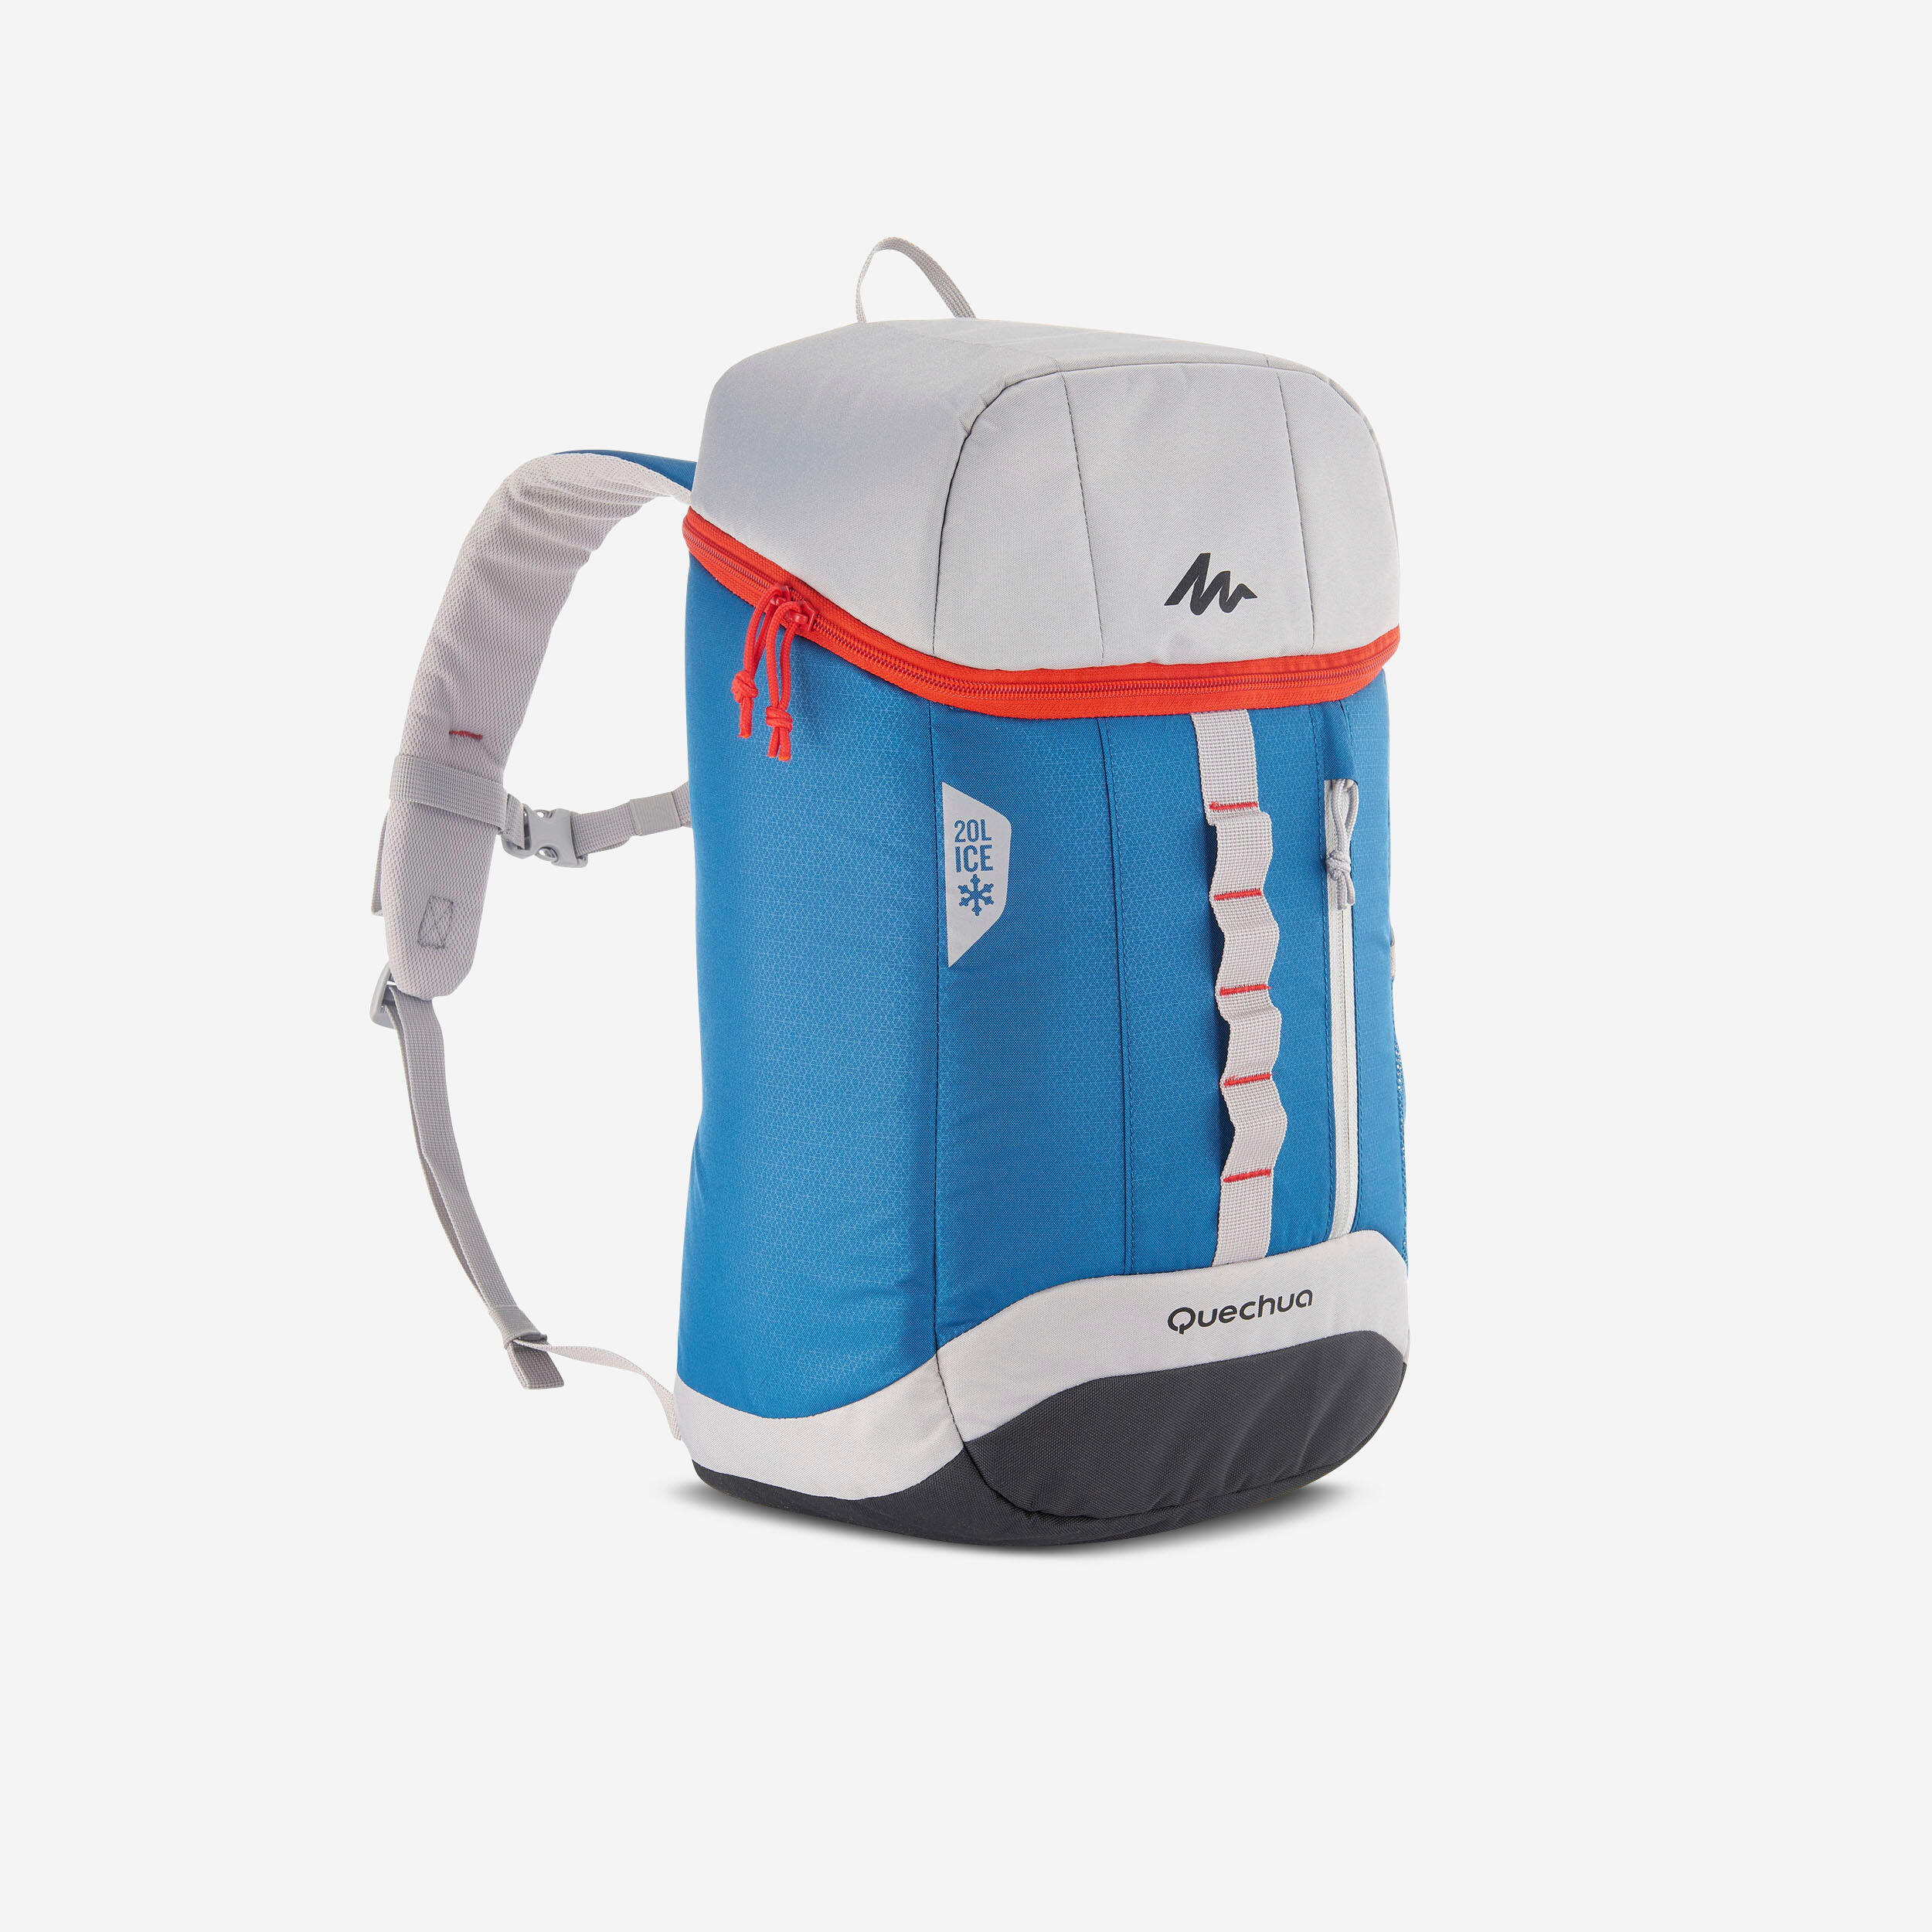 CAMPING AND HIKING - 20 LITRES - ICE 